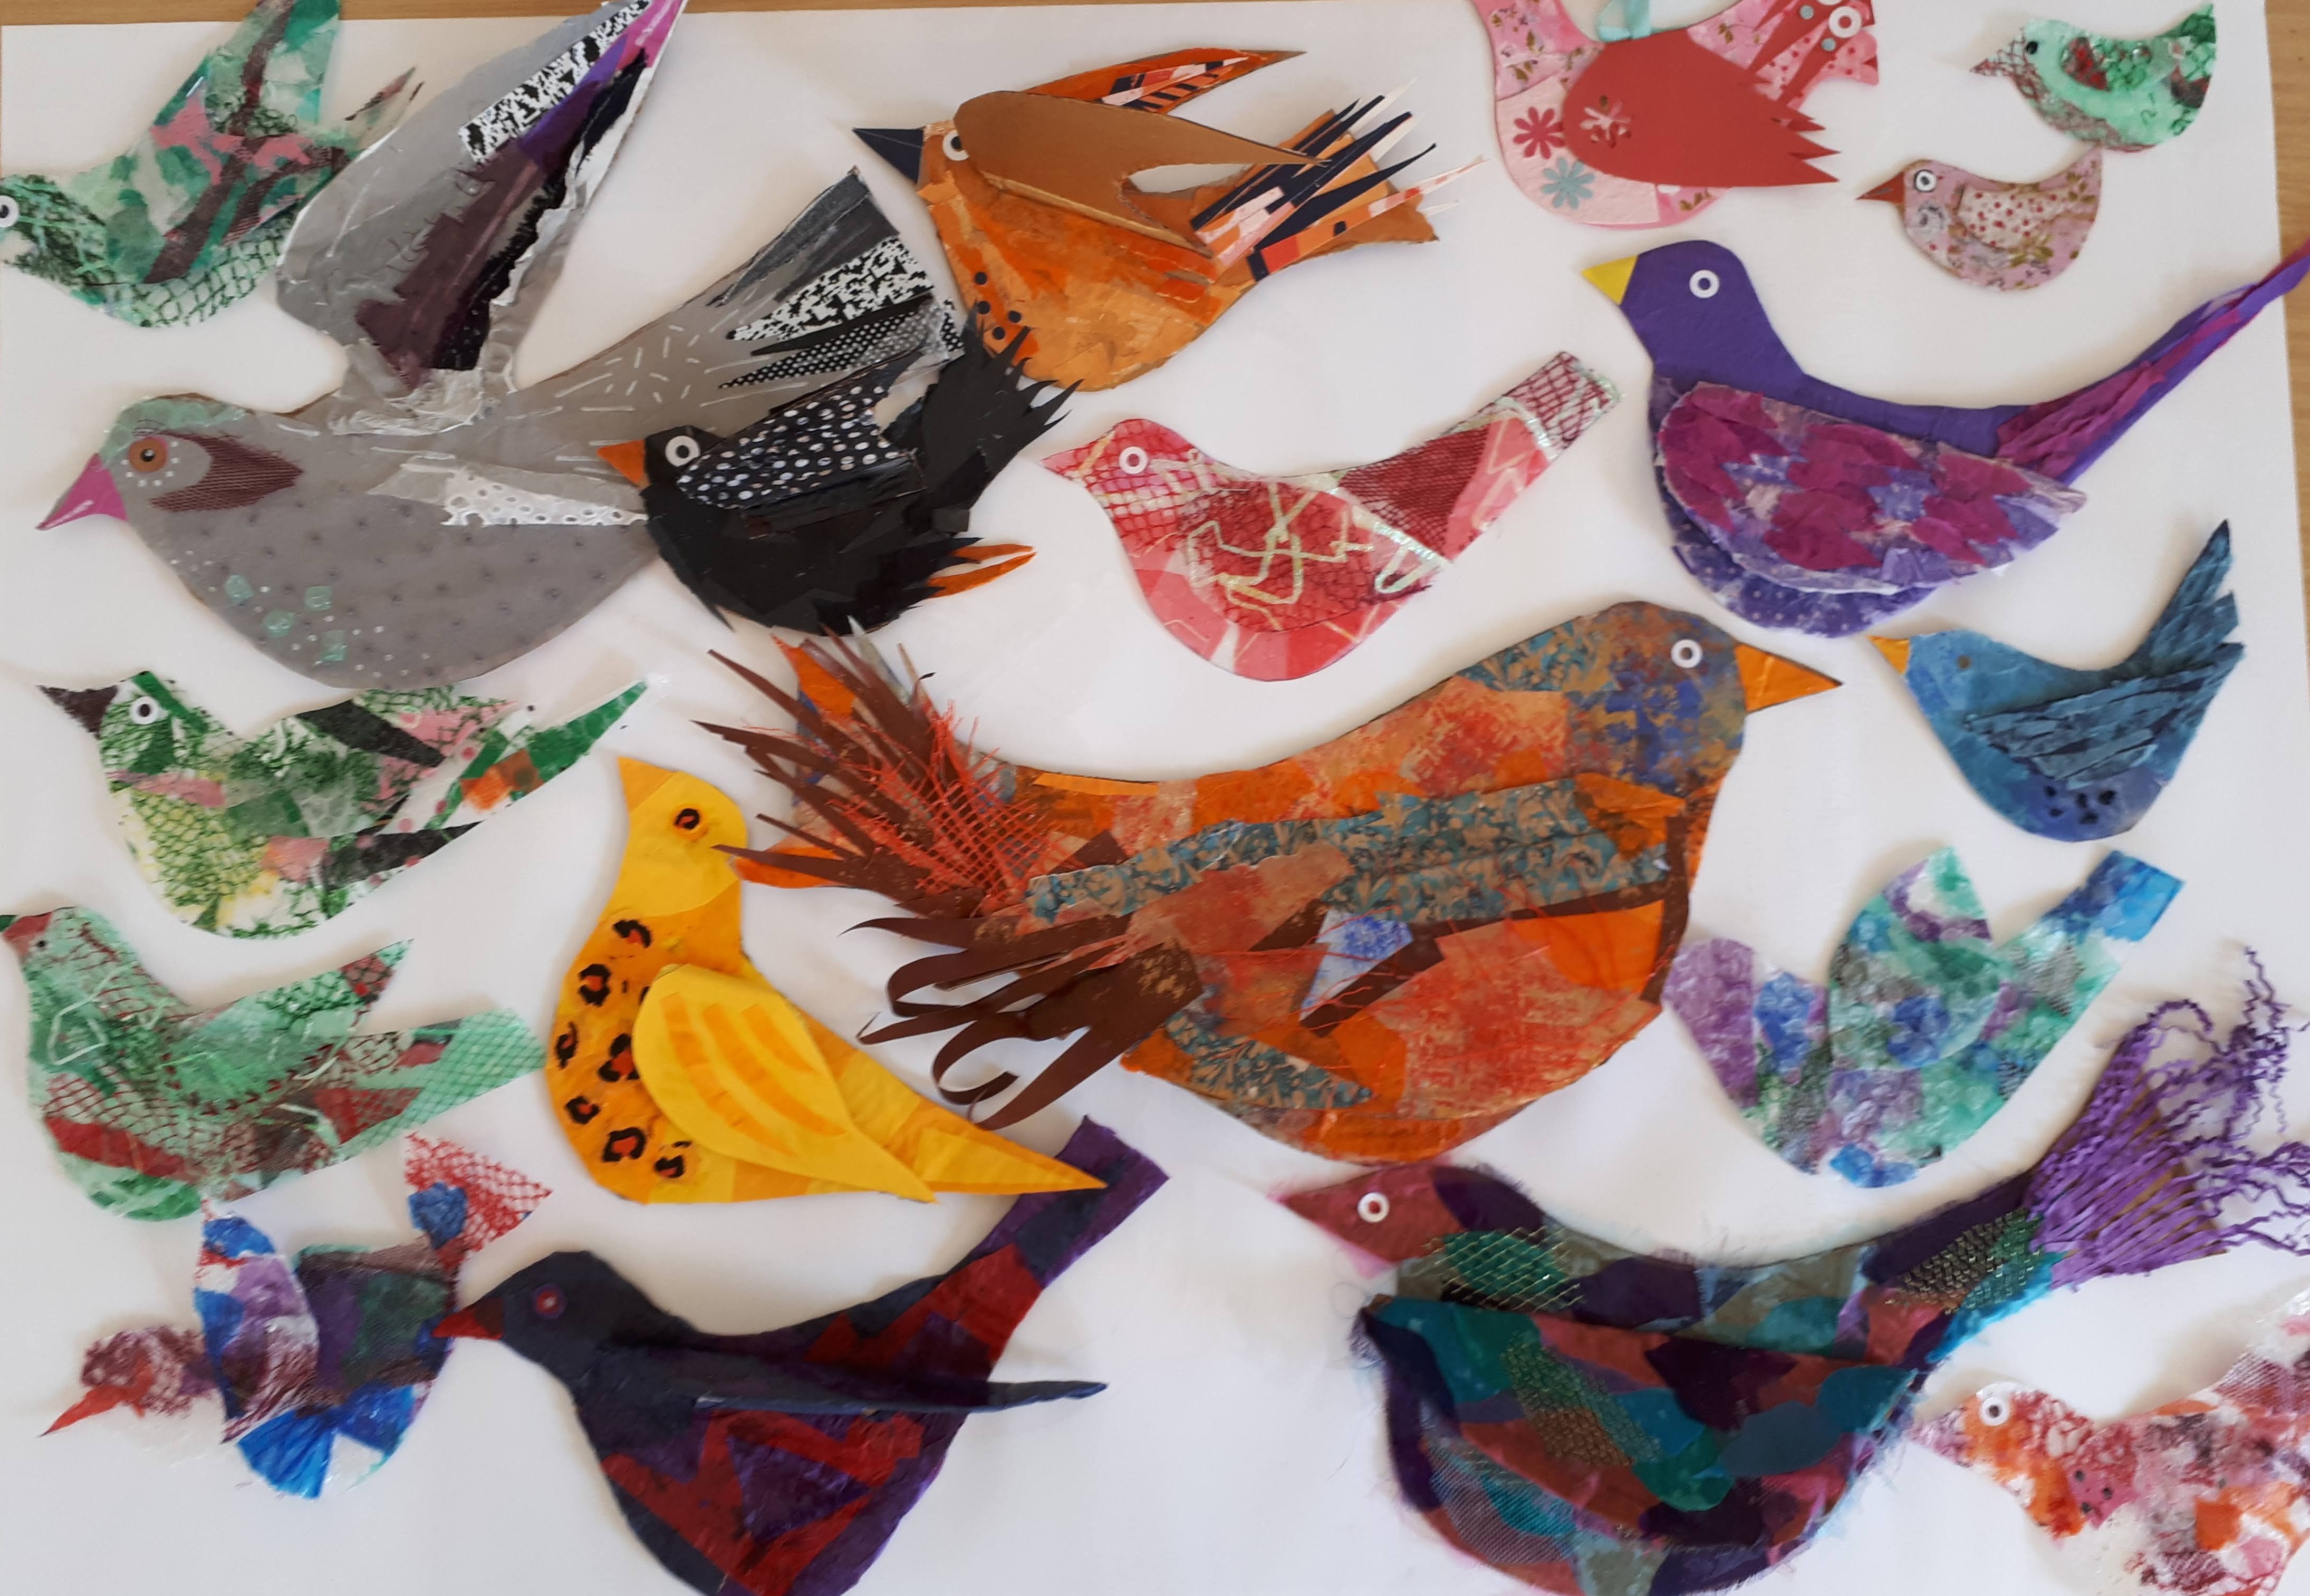 A selection of birds made at the York International Women's Week workshop laid out on a table.